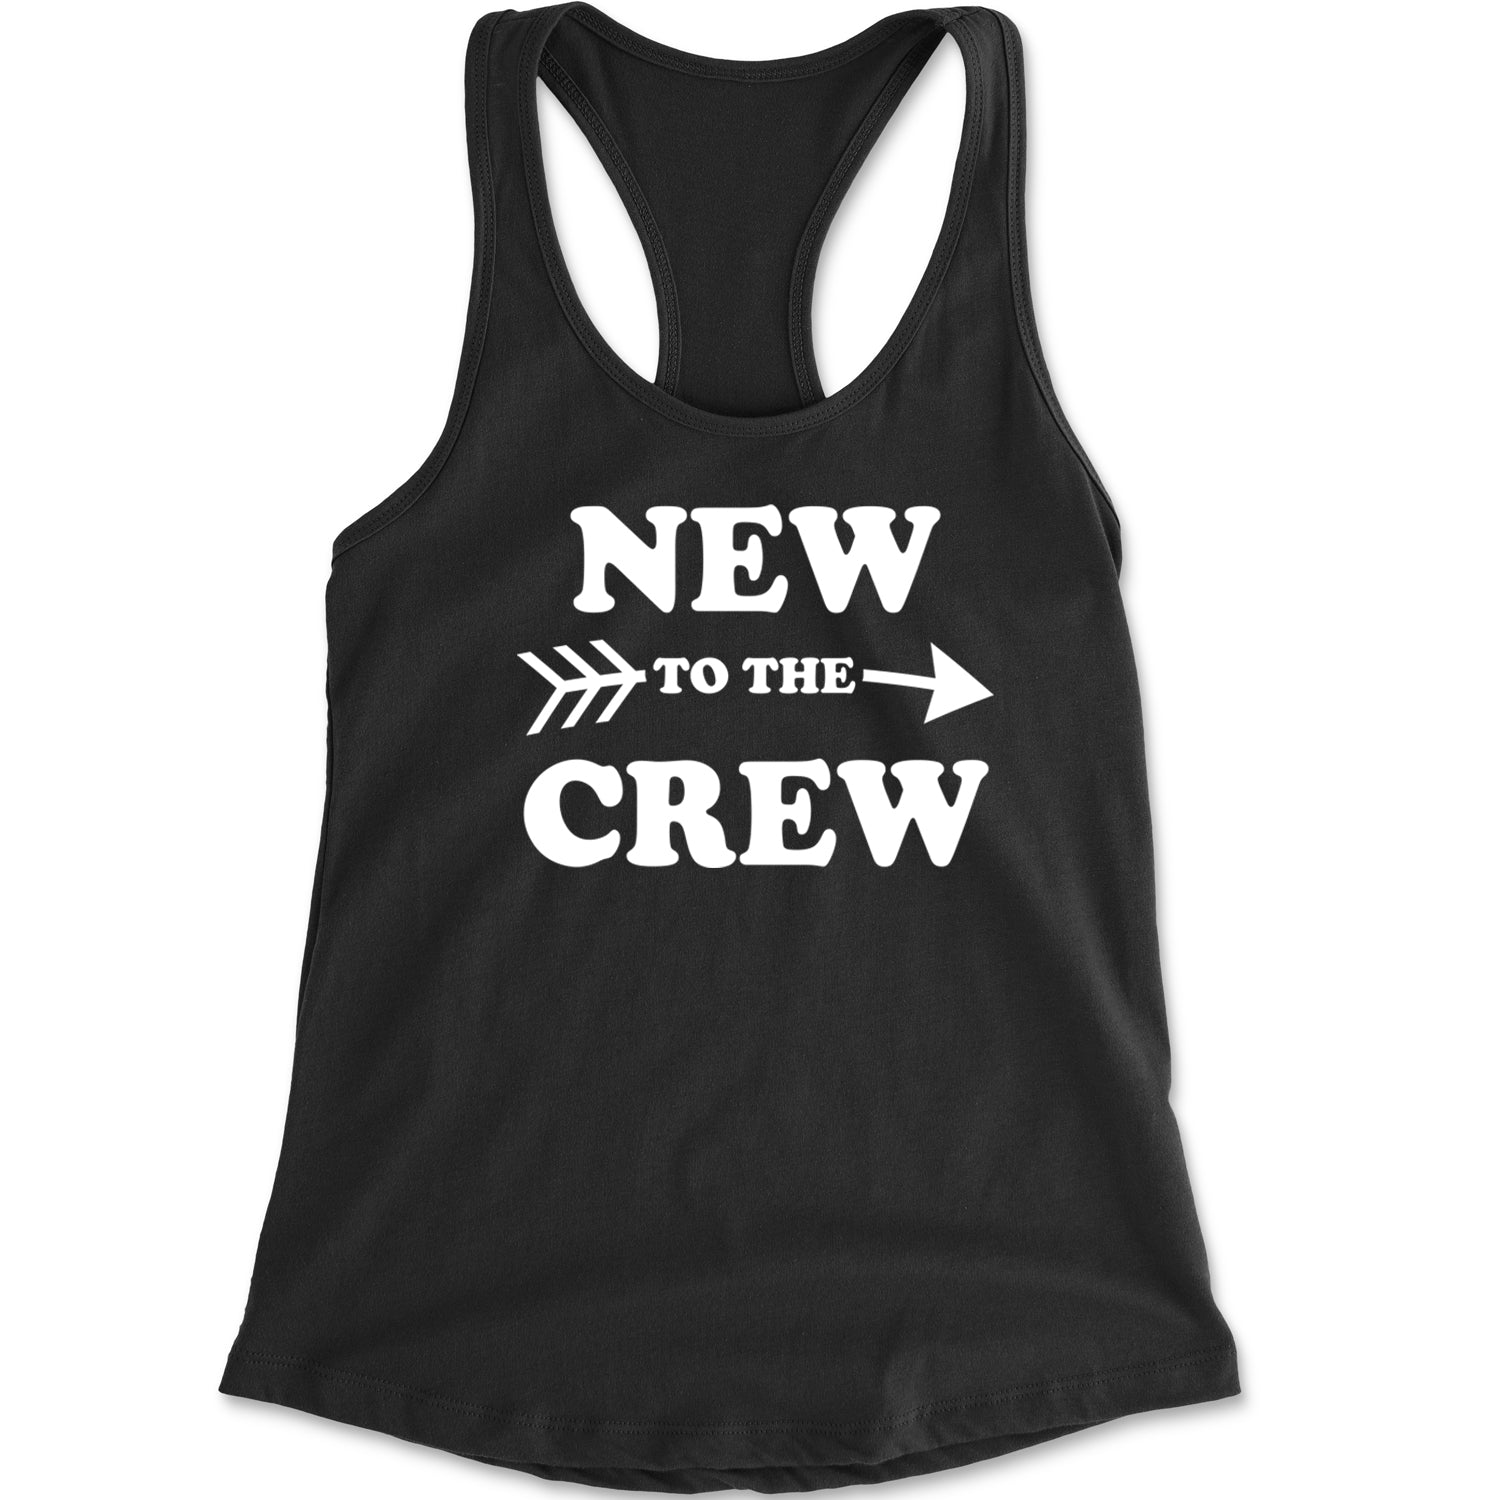 New To The Crew Racerback Tank Top for Women announcement, baby, cousin, gender, newborn, reveal, toddler by Expression Tees